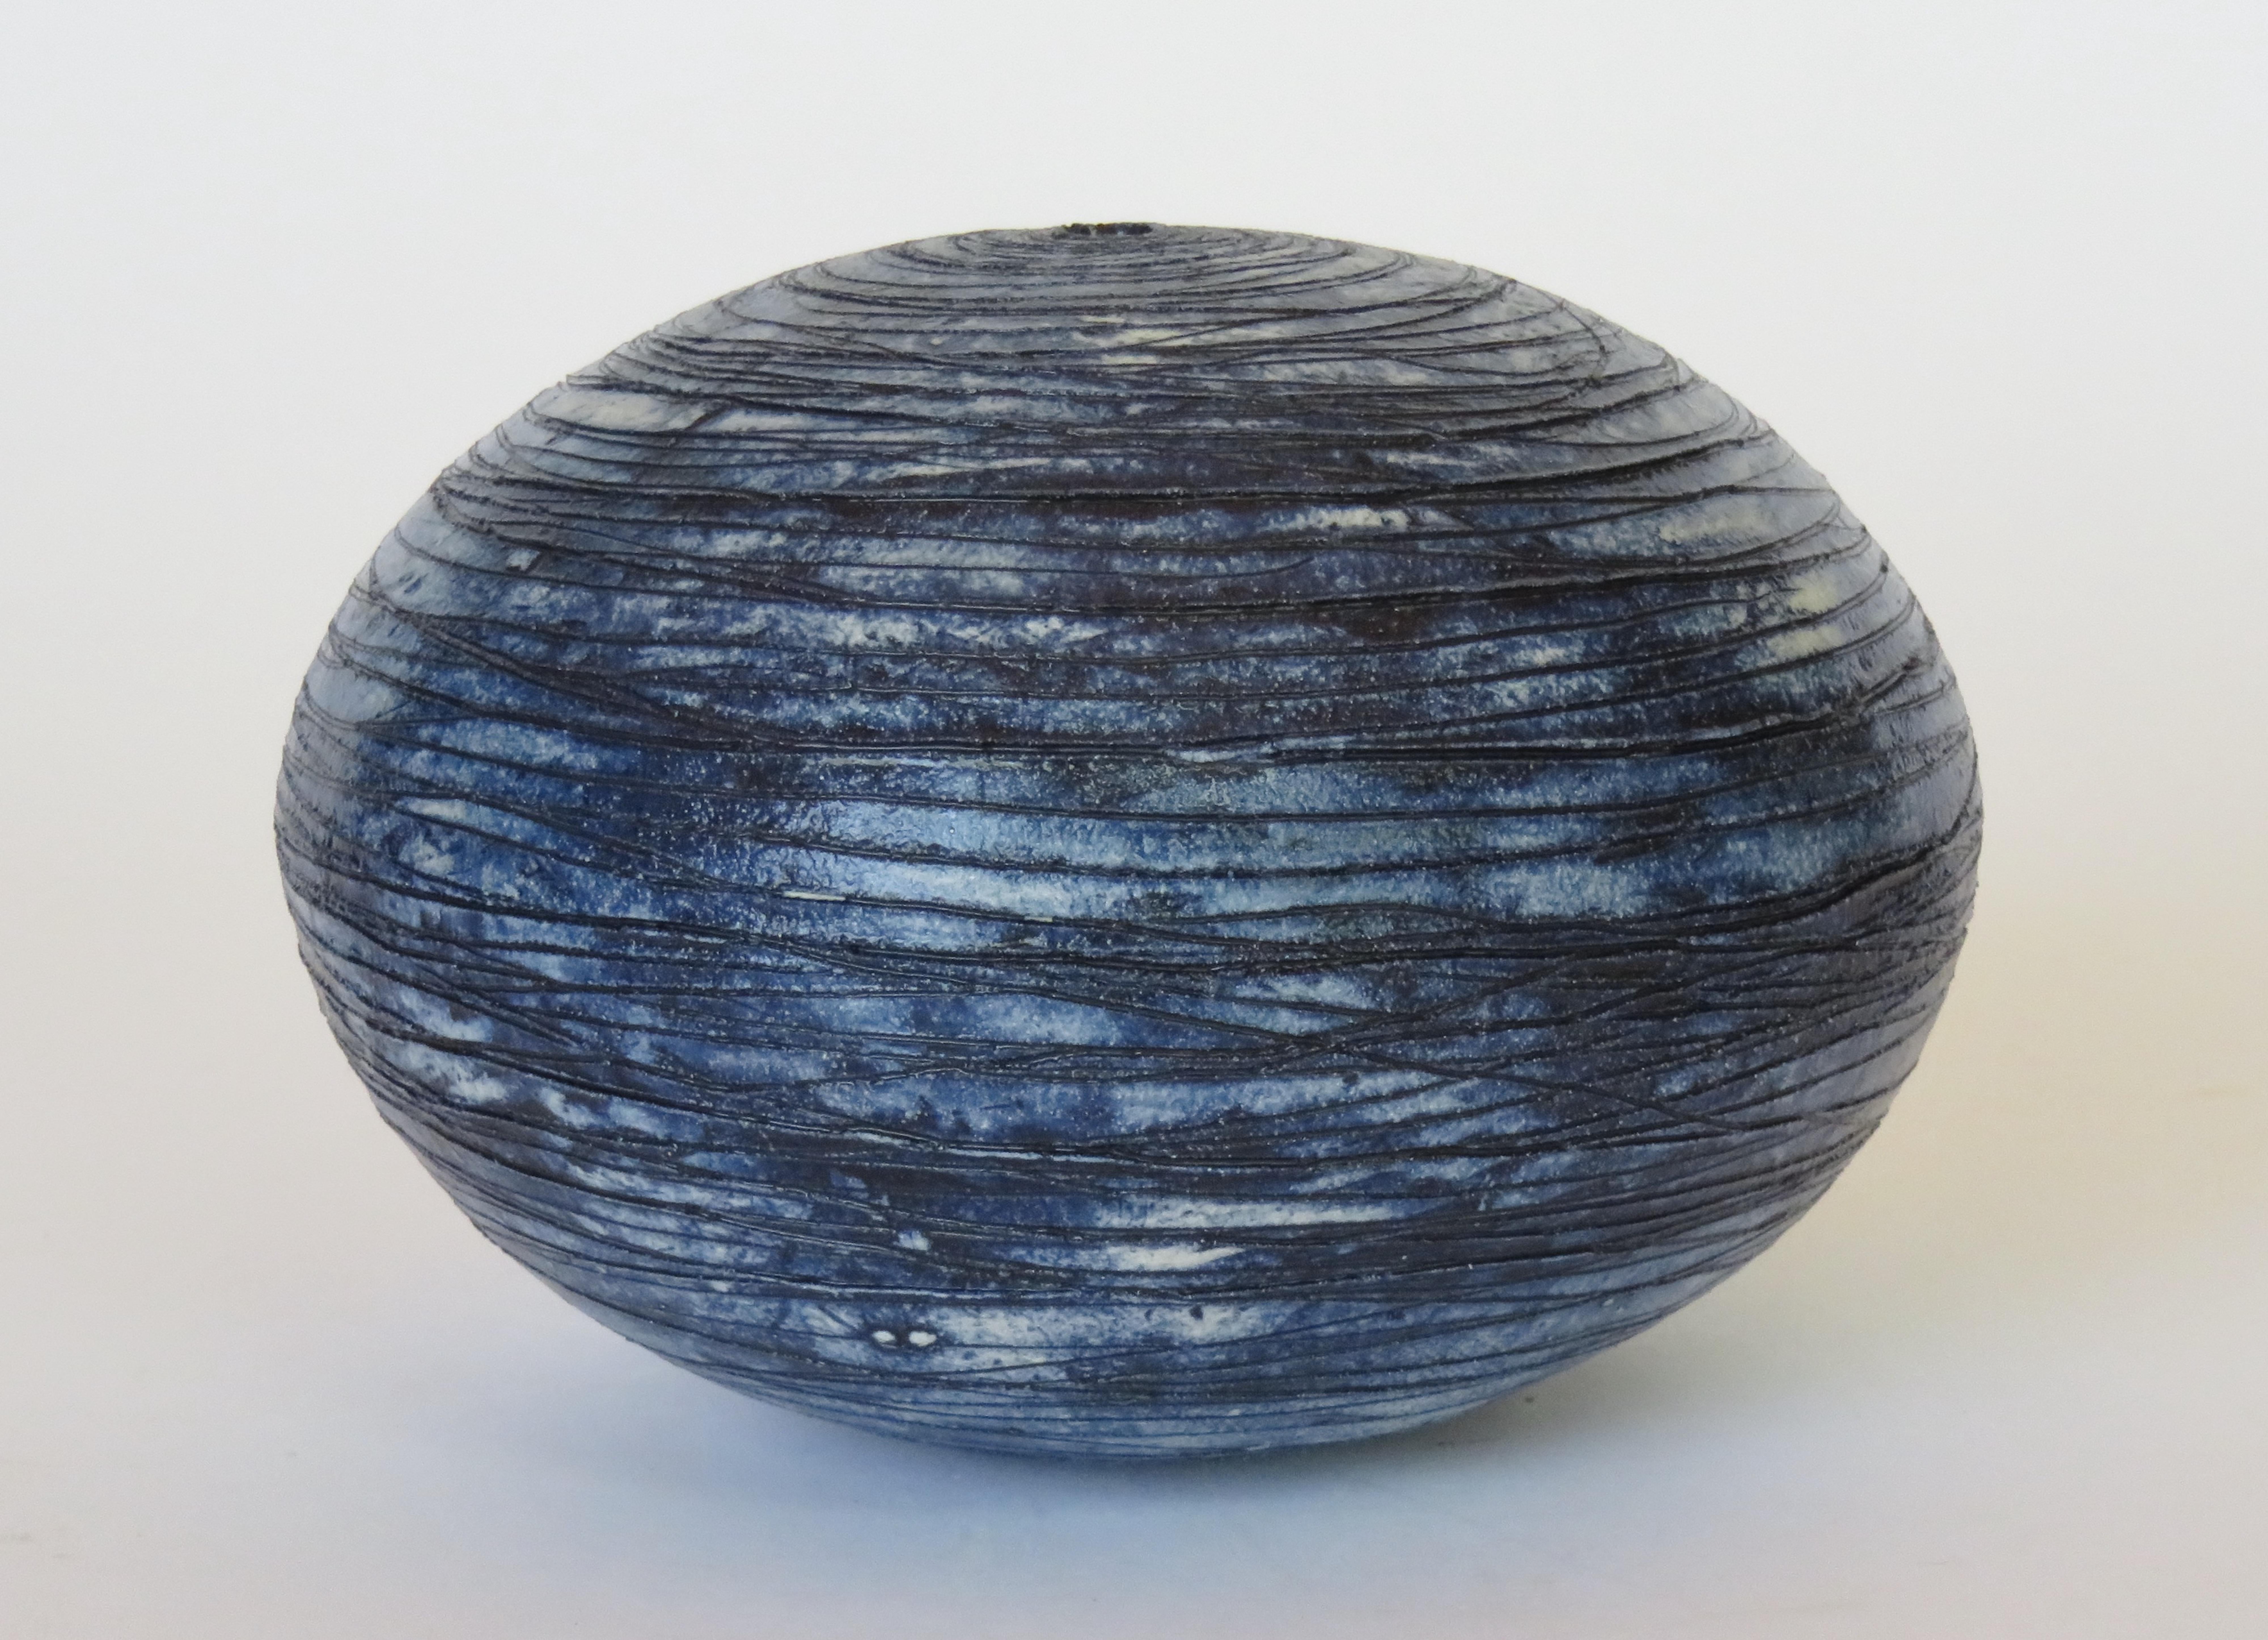 North American Hand Carved Sphere, Ceramic Sculpture in Deep Blue Wash